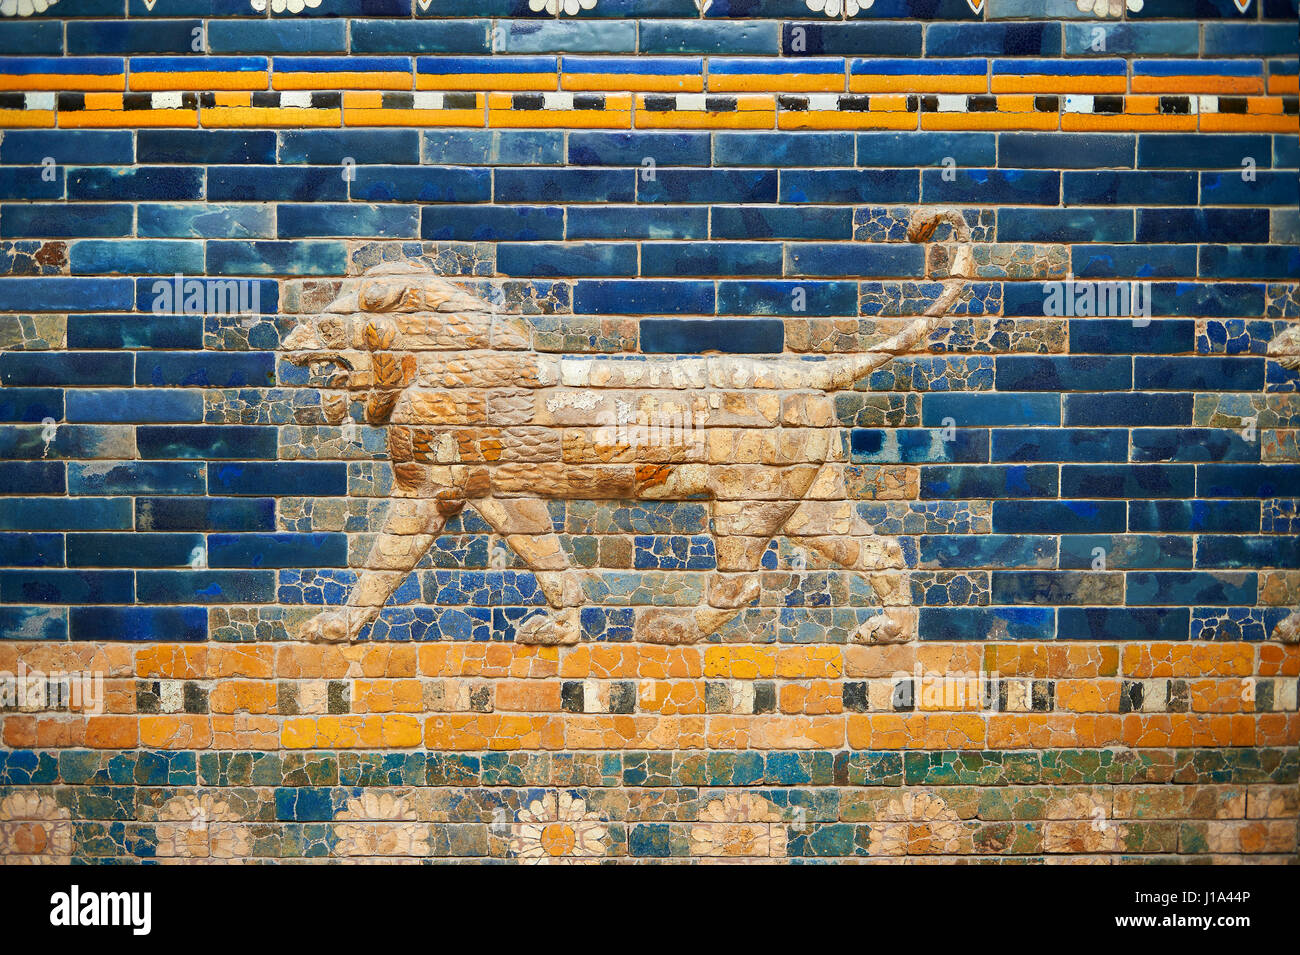 Coloured glazed brick panels depicting Lions stiding from the facade of the Throne Room dating from 604-562 BC. Babylon (present day Iraq). The throne Stock Photo